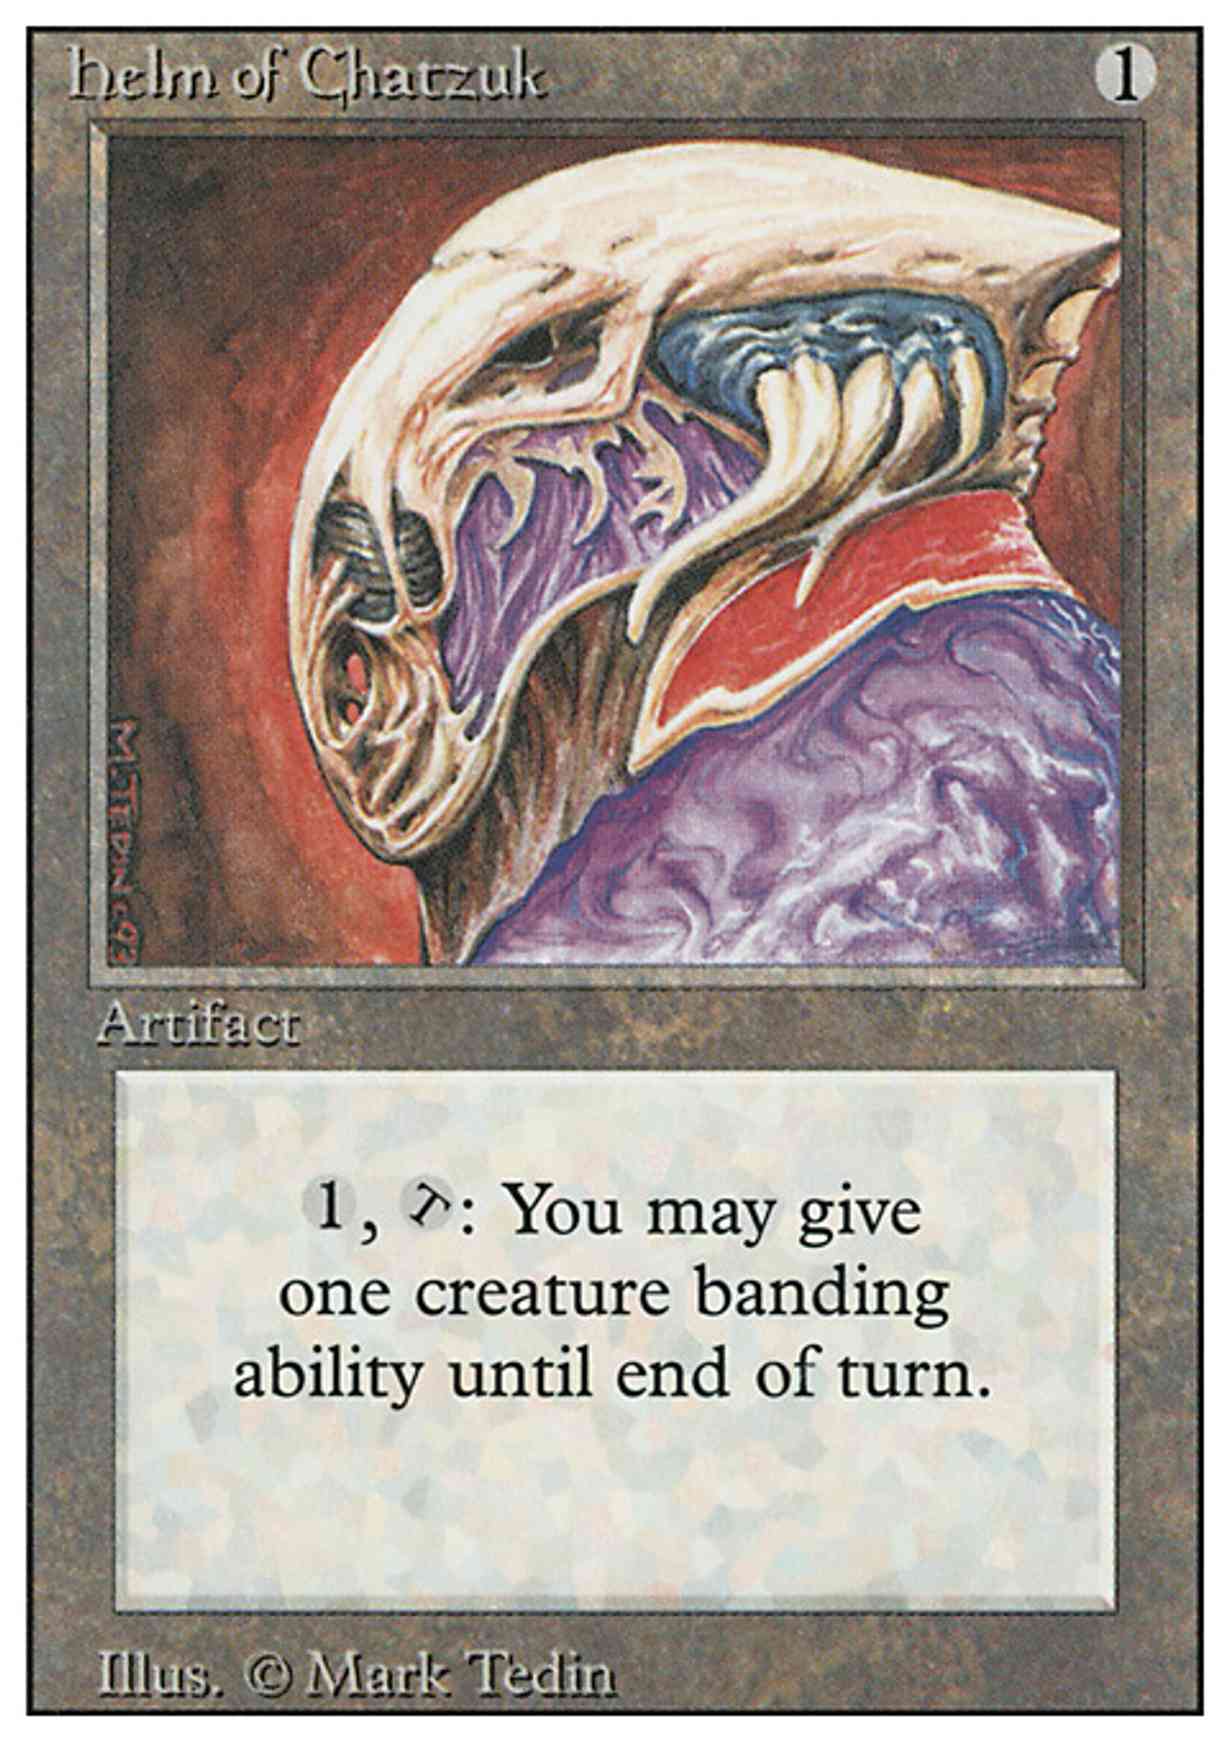 Helm of Chatzuk magic card front